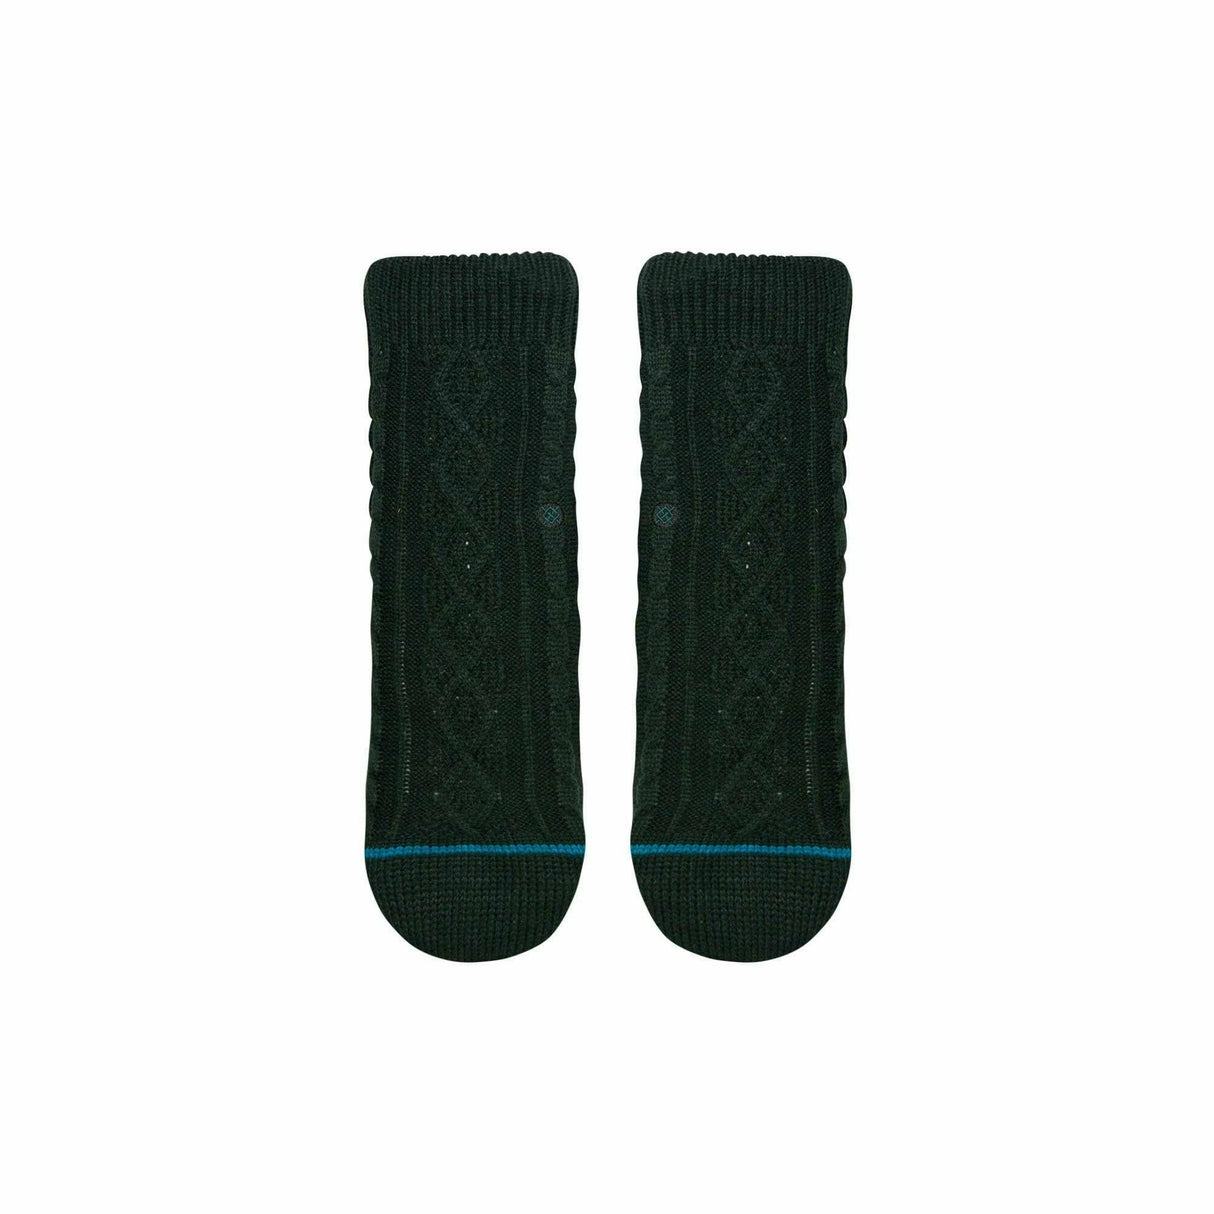 Stance Toasted Slipper Crew Socks  -  Small / Green